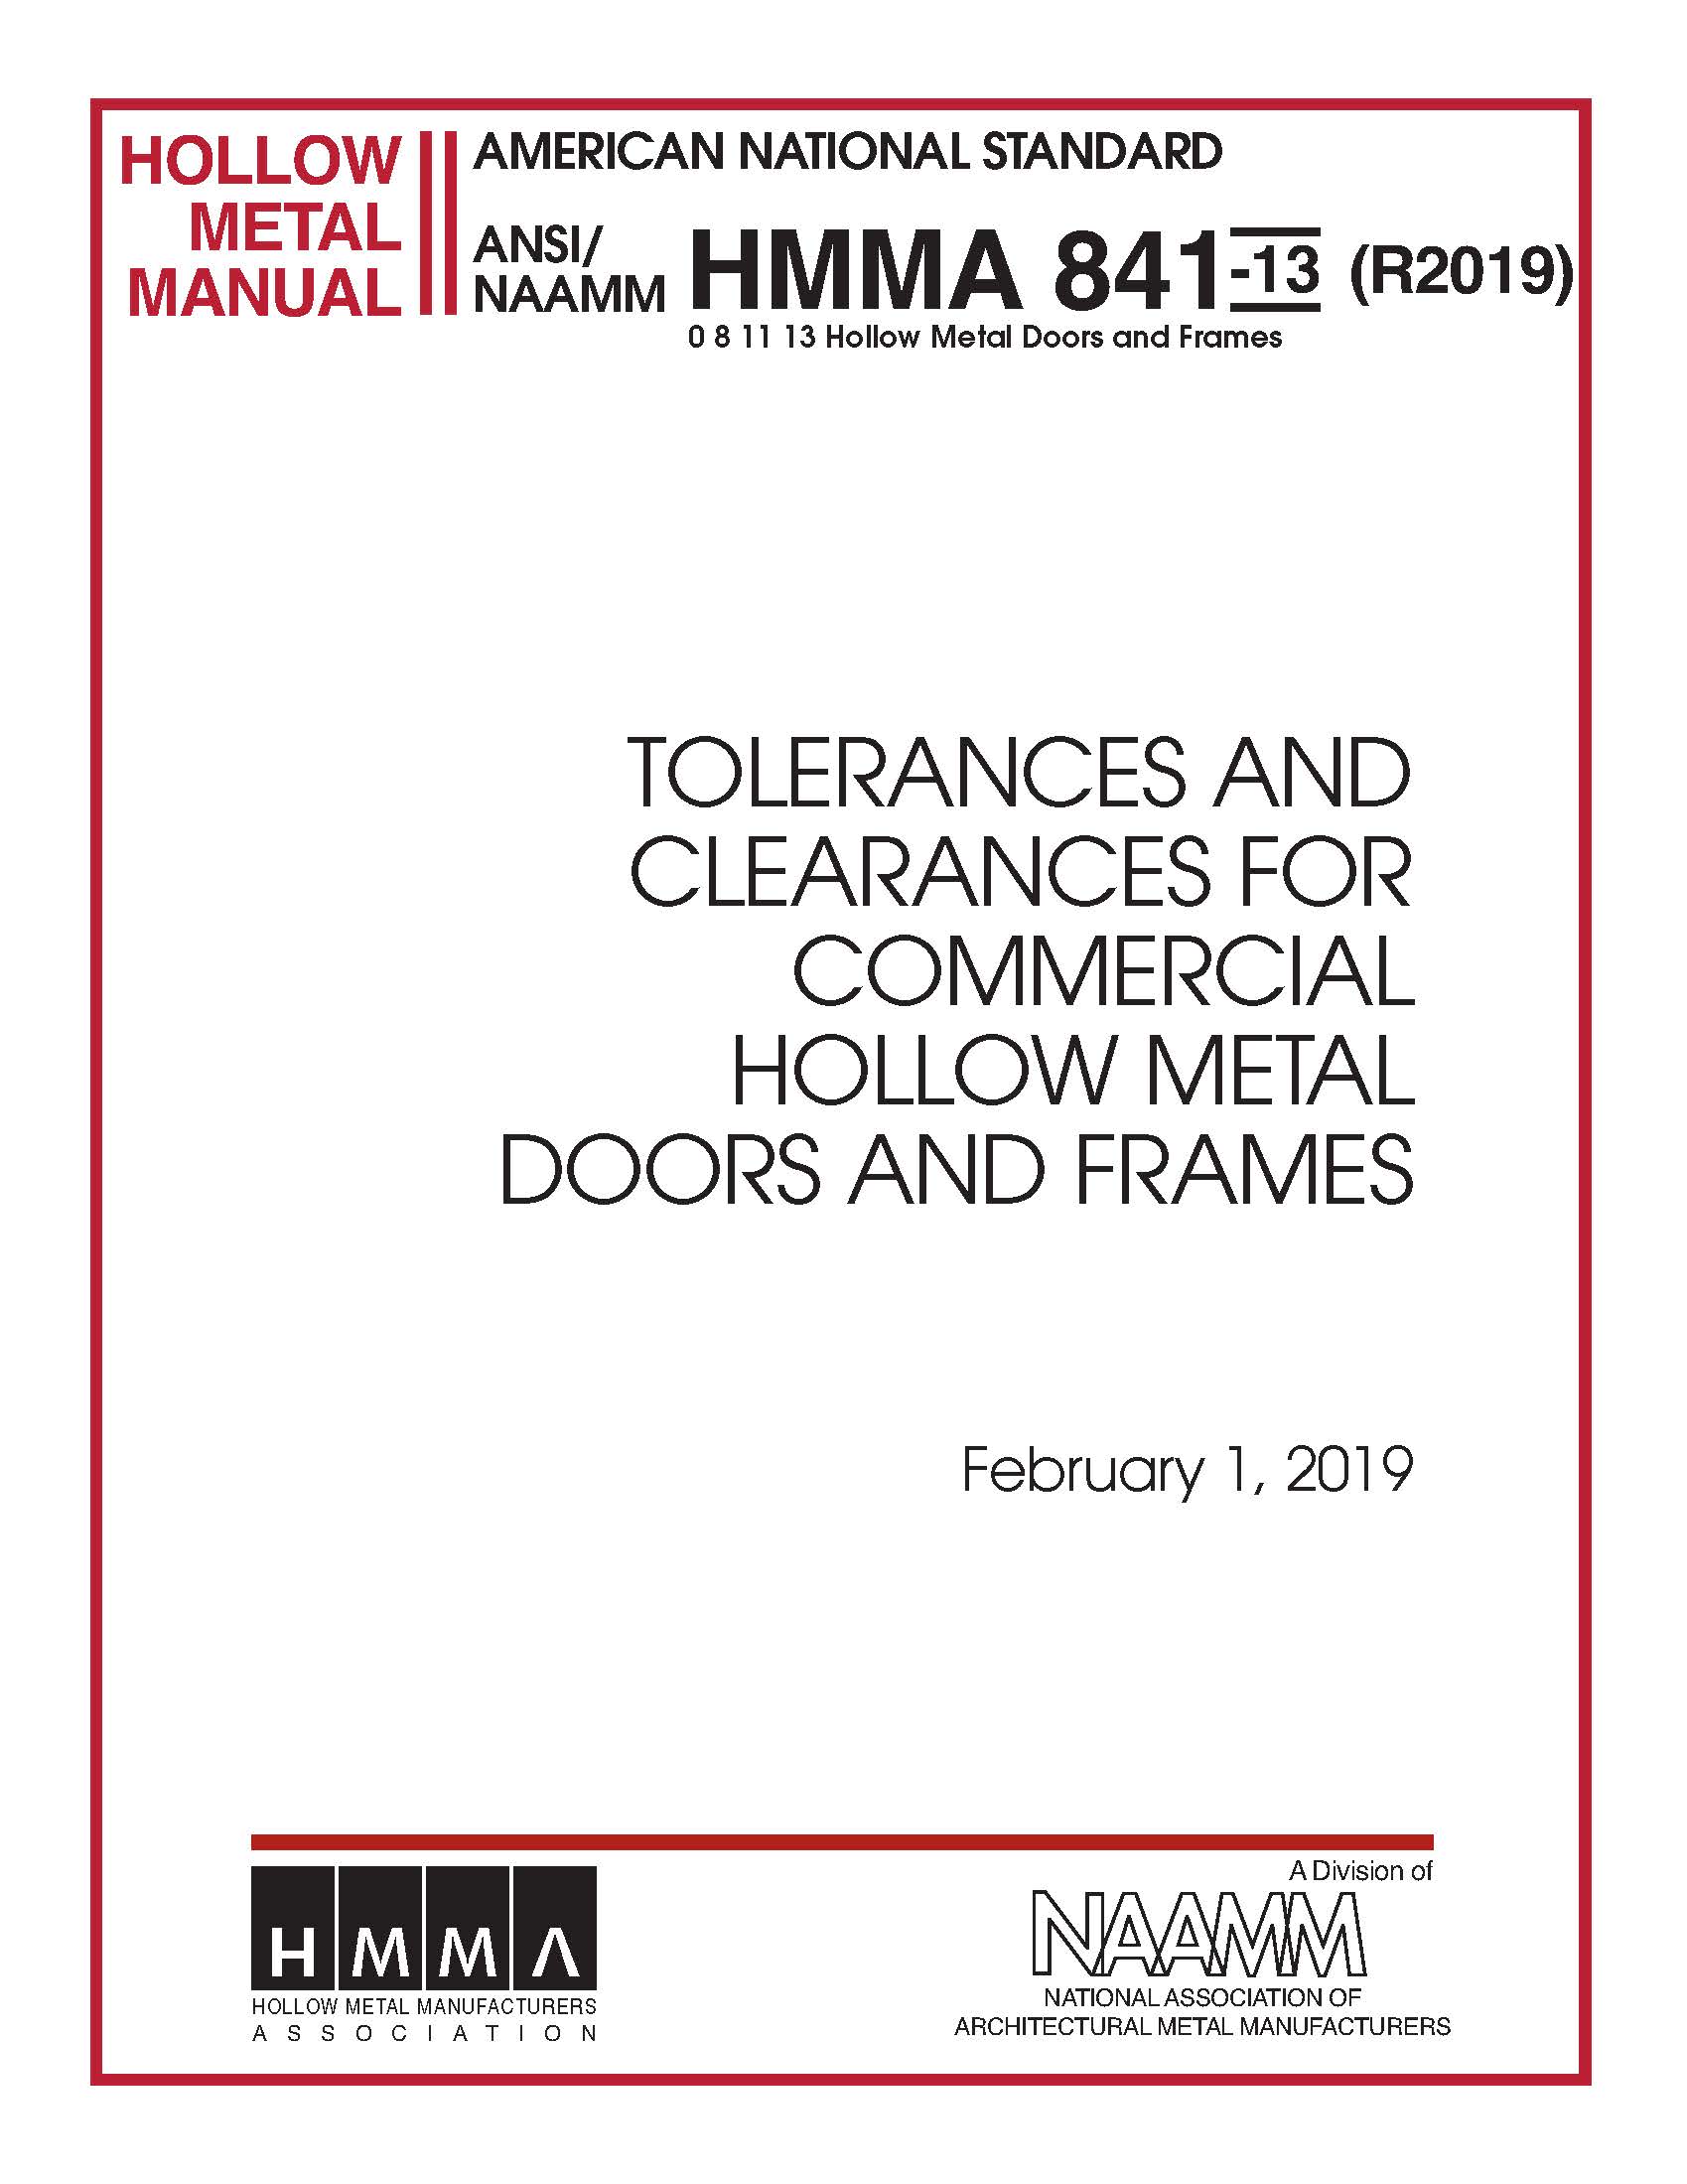 Tolerances and Clearances for Commercial Hollow Metal Doors and Frames